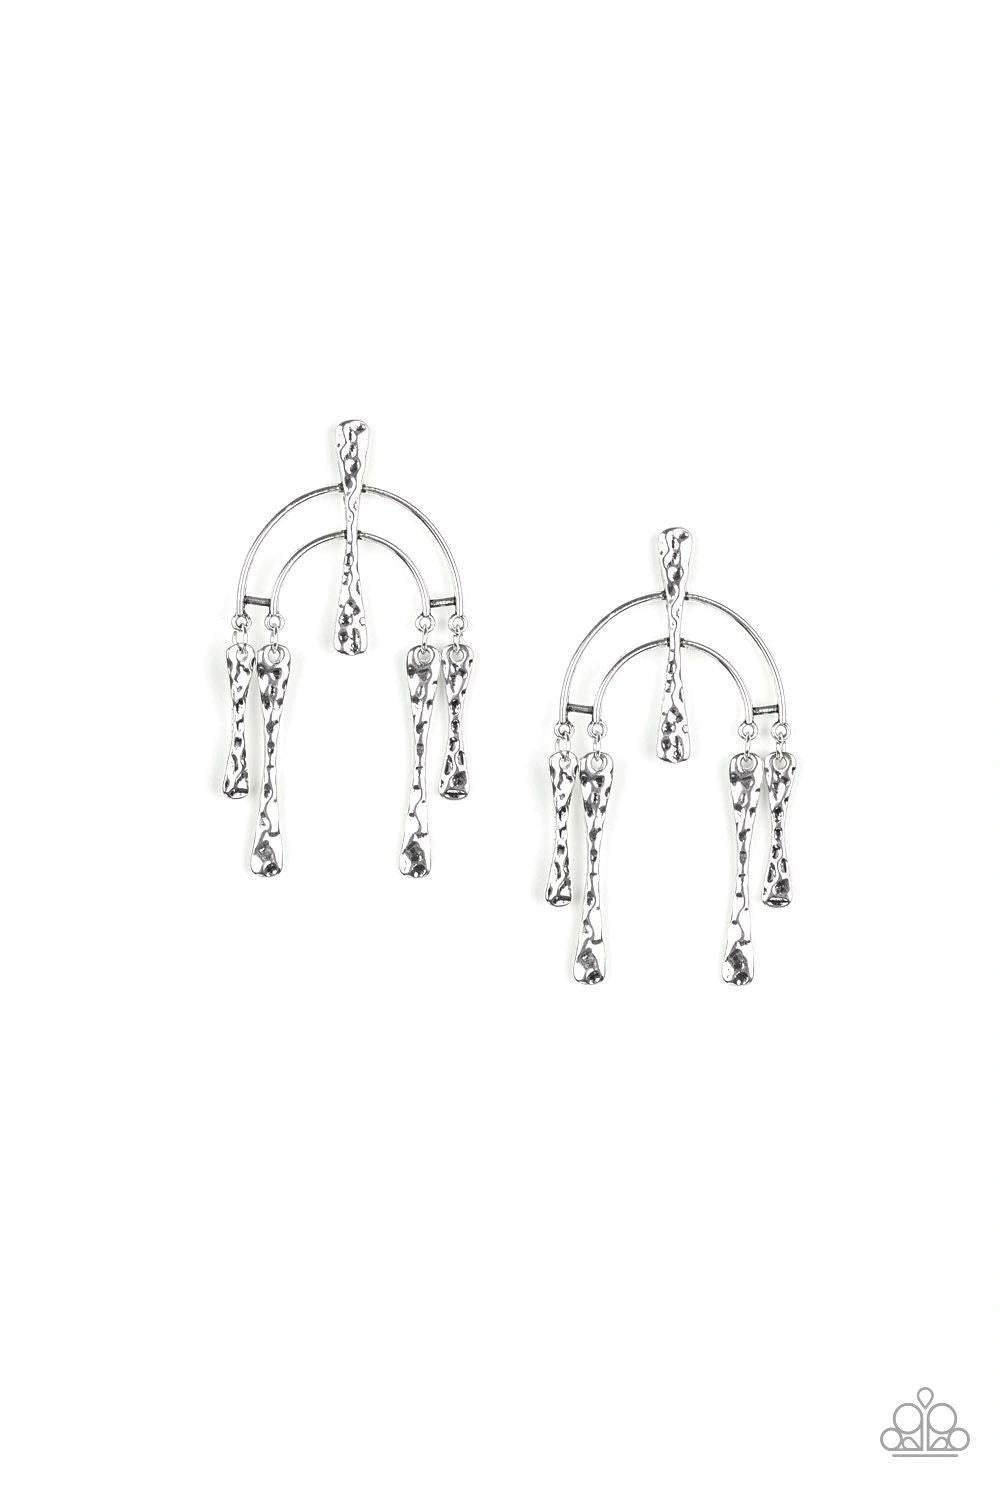 ARTIFACTS Of Life Silver Earrings - Paparazzi Accessories - lightbox -CarasShop.com - $5 Jewelry by Cara Jewels